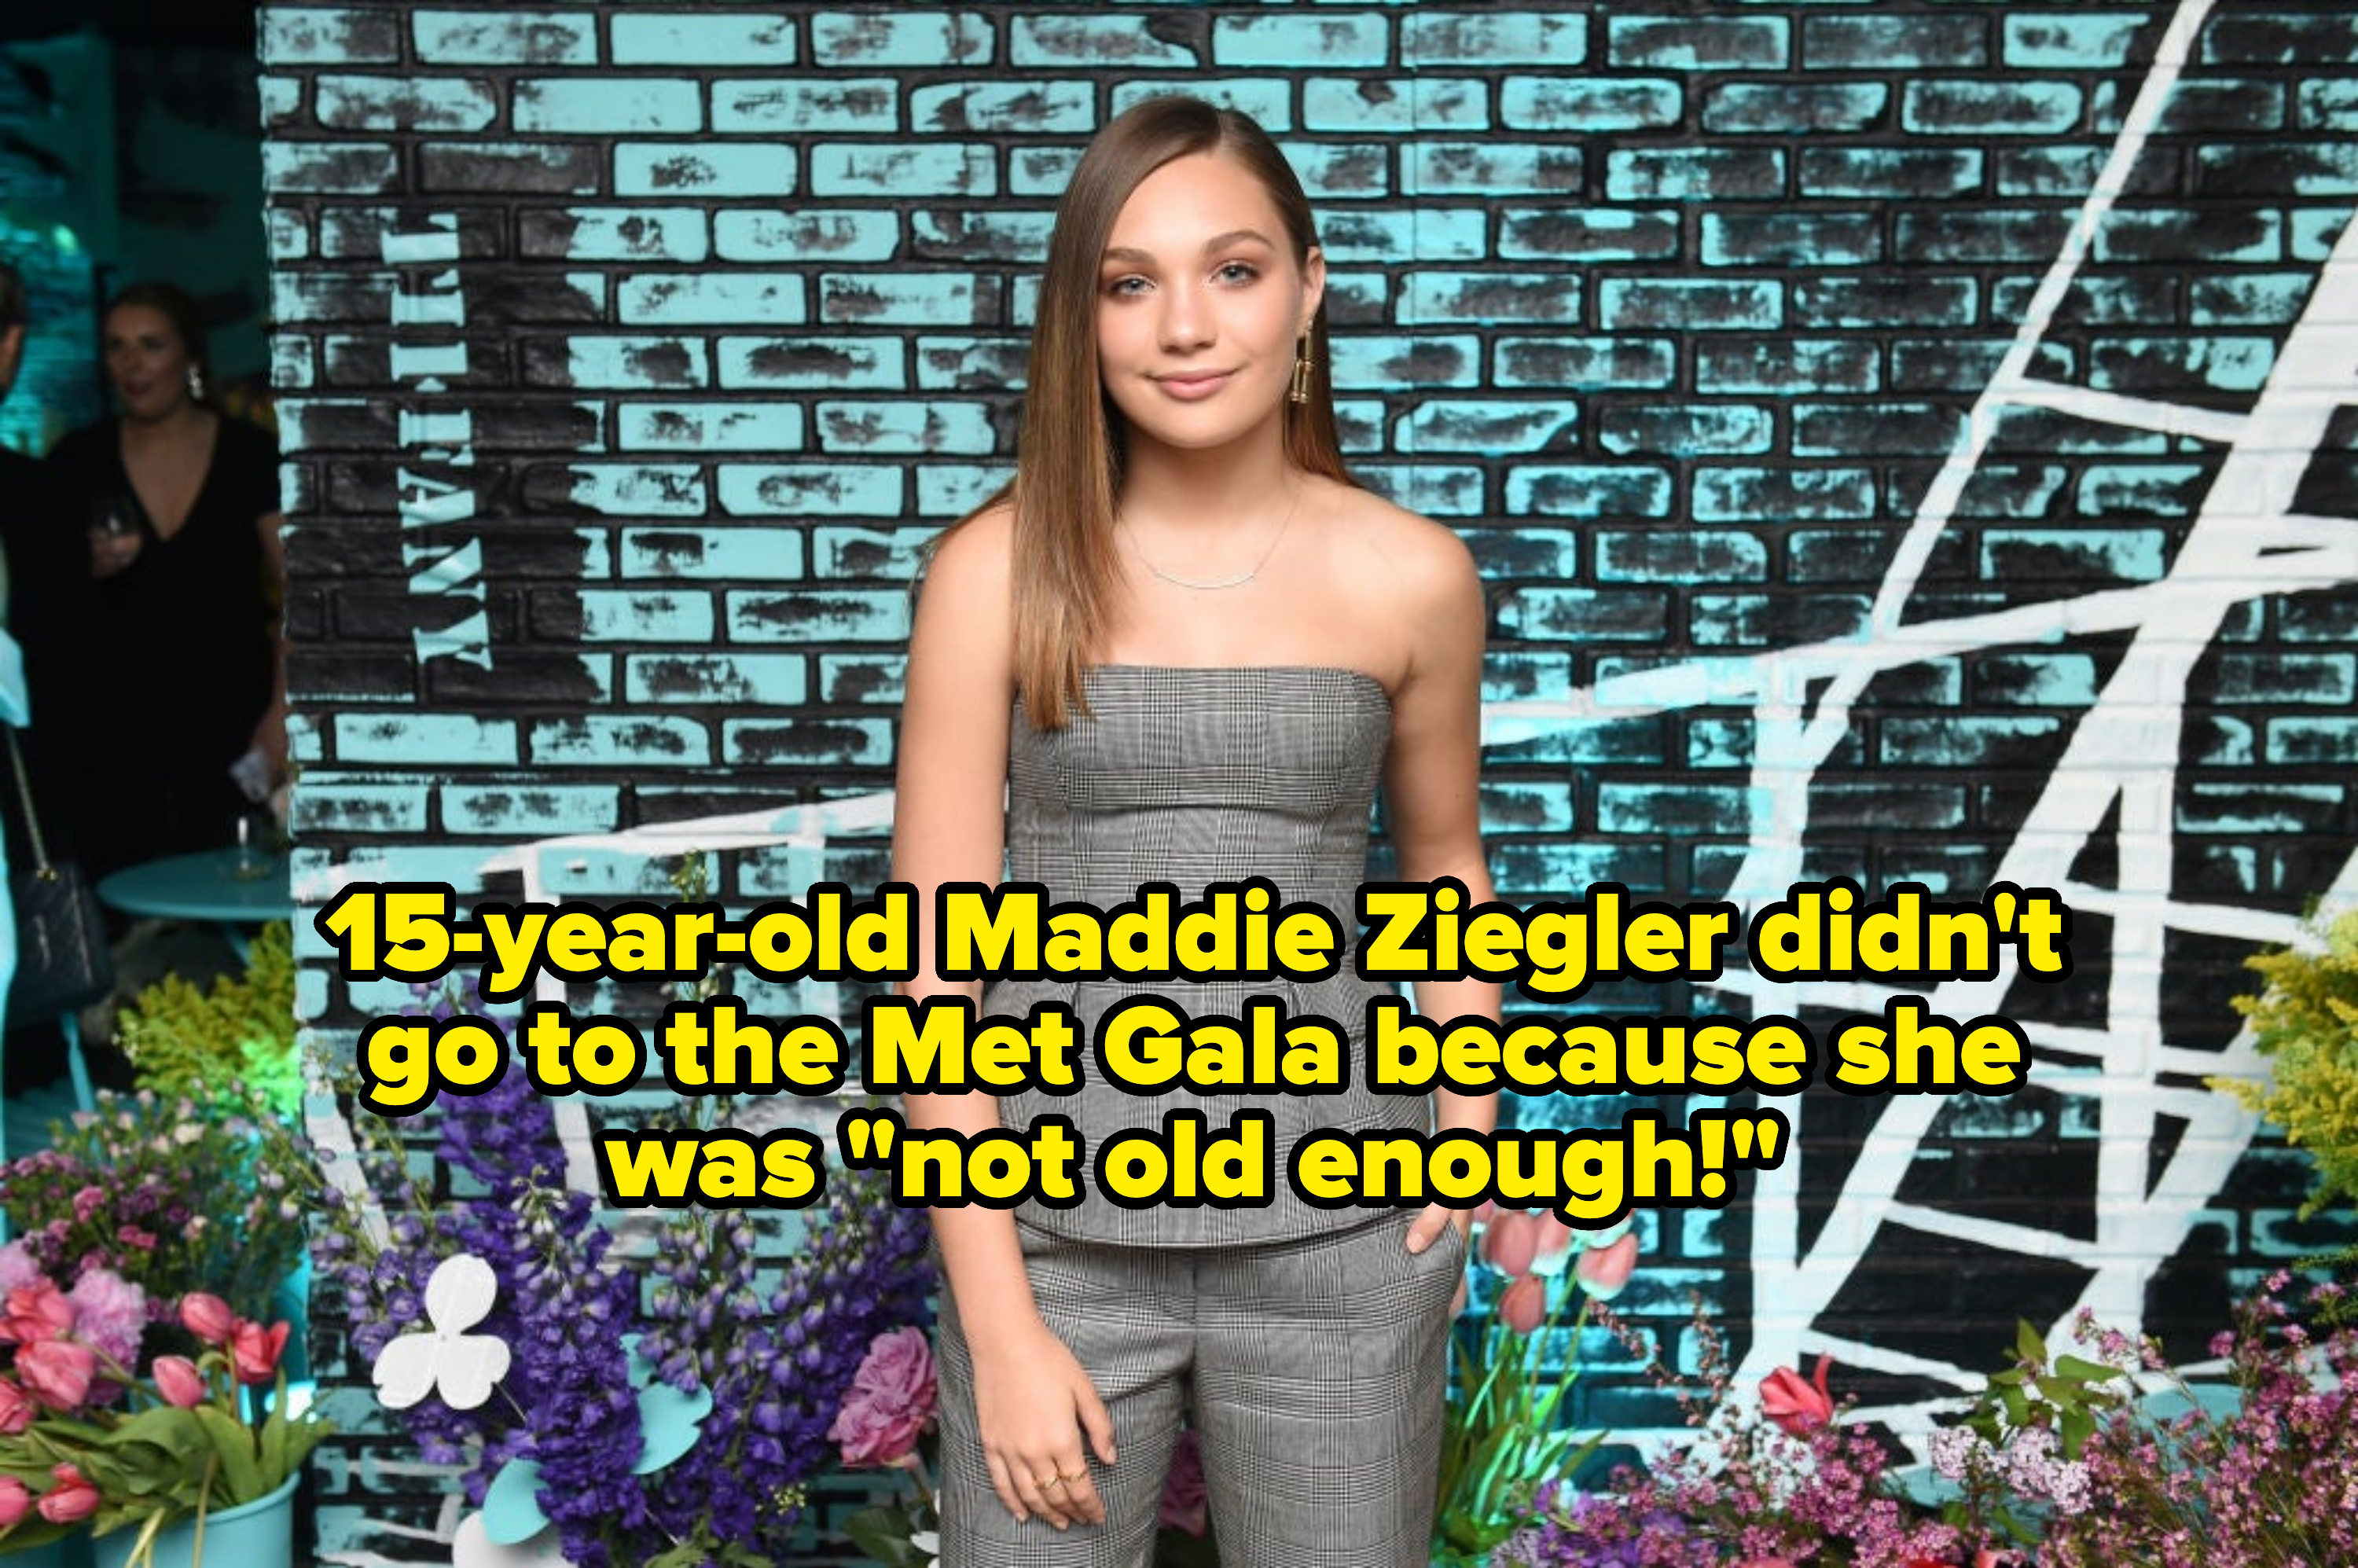 Maddie Ziegler standing before a floral and graffiti backdrop, wearing a strapless plaid ensemble